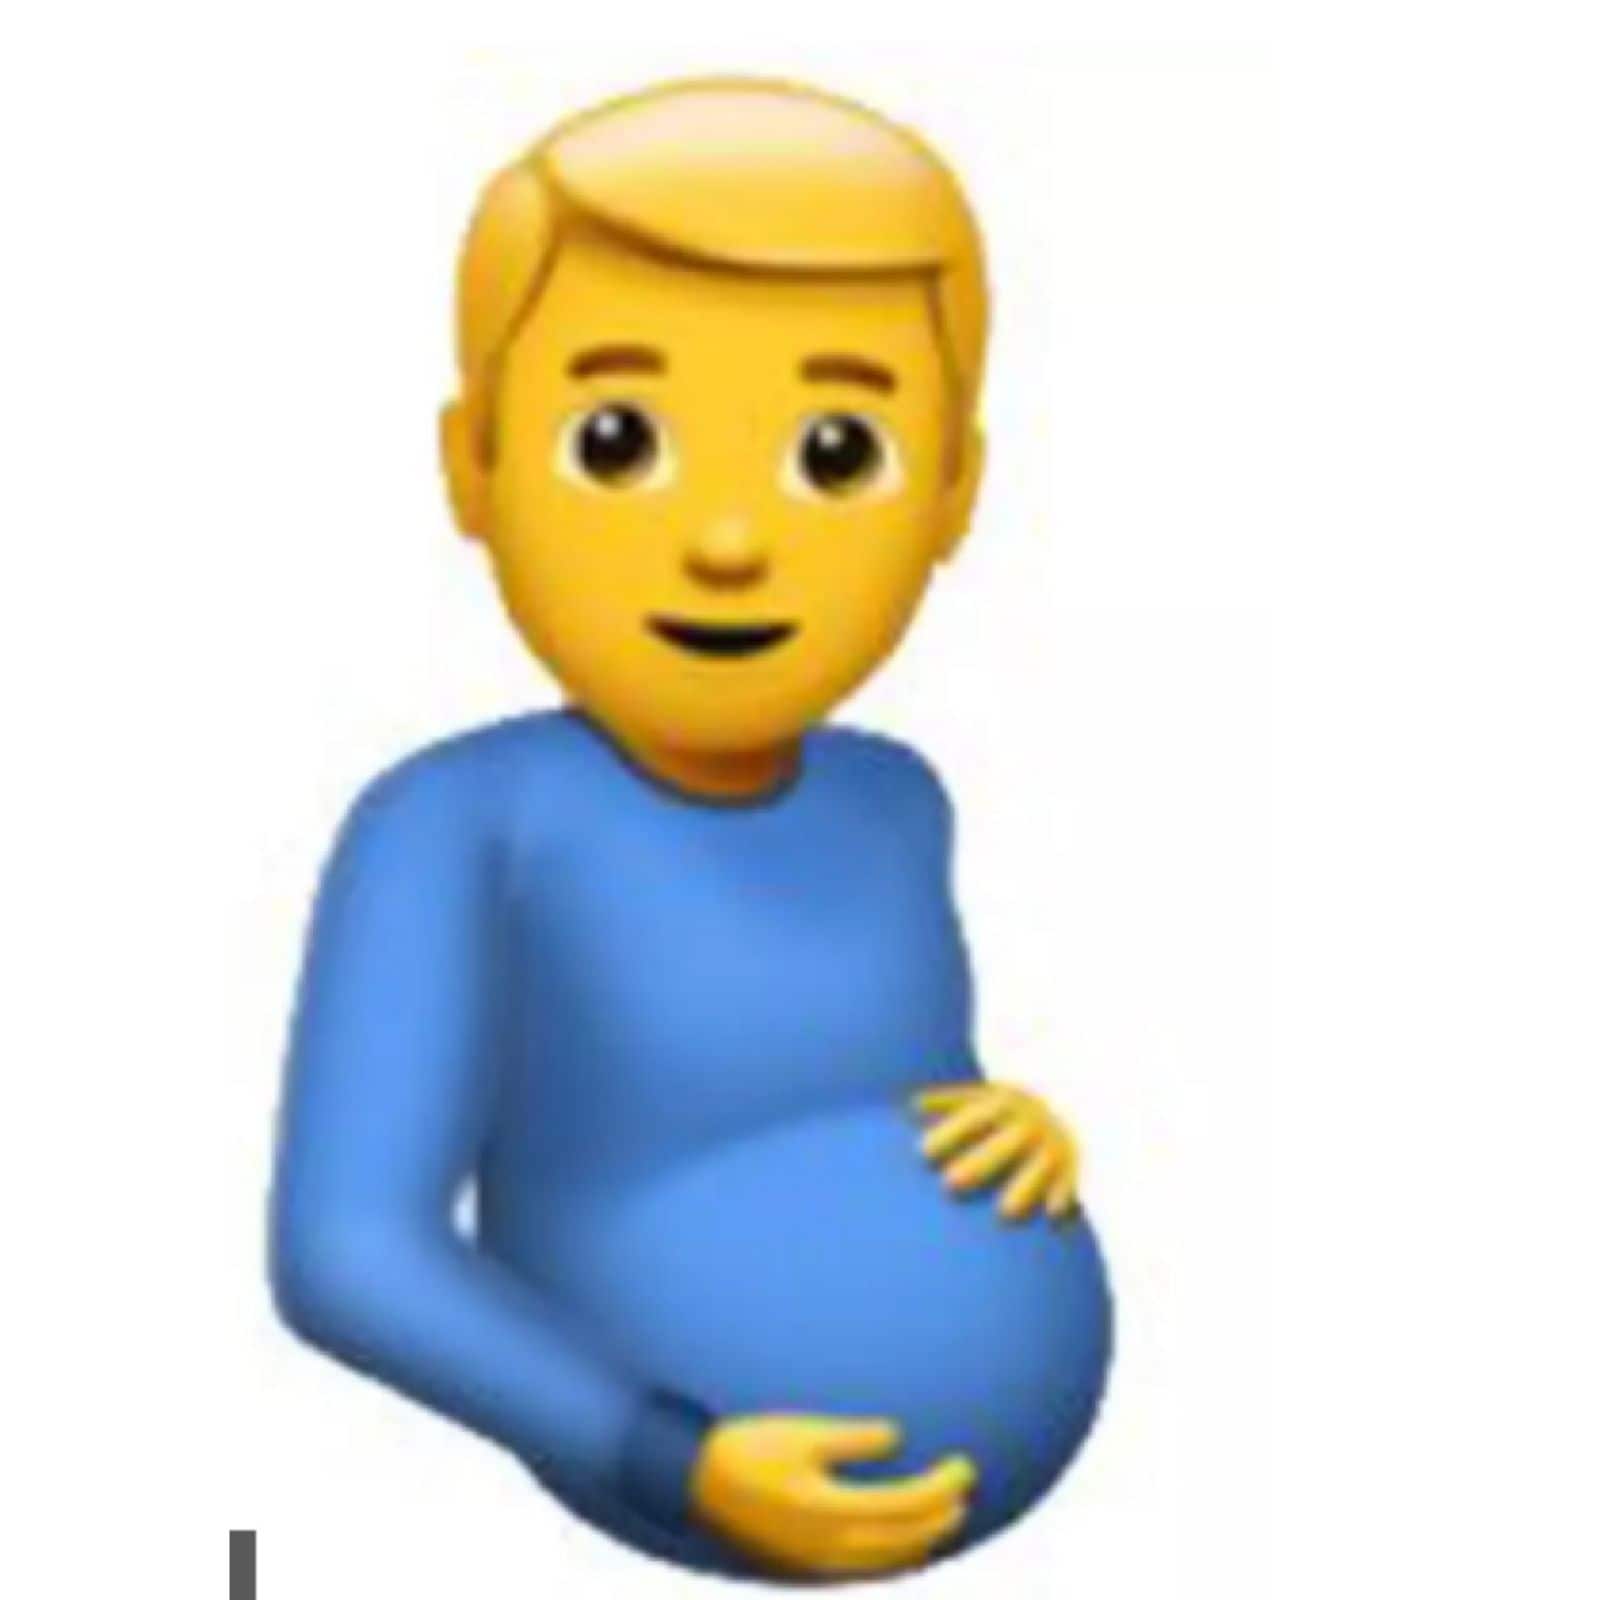 Apple Introduced 'Pregnant Man' Emoji to be Trans Inclusive, But Some Users  are Angry